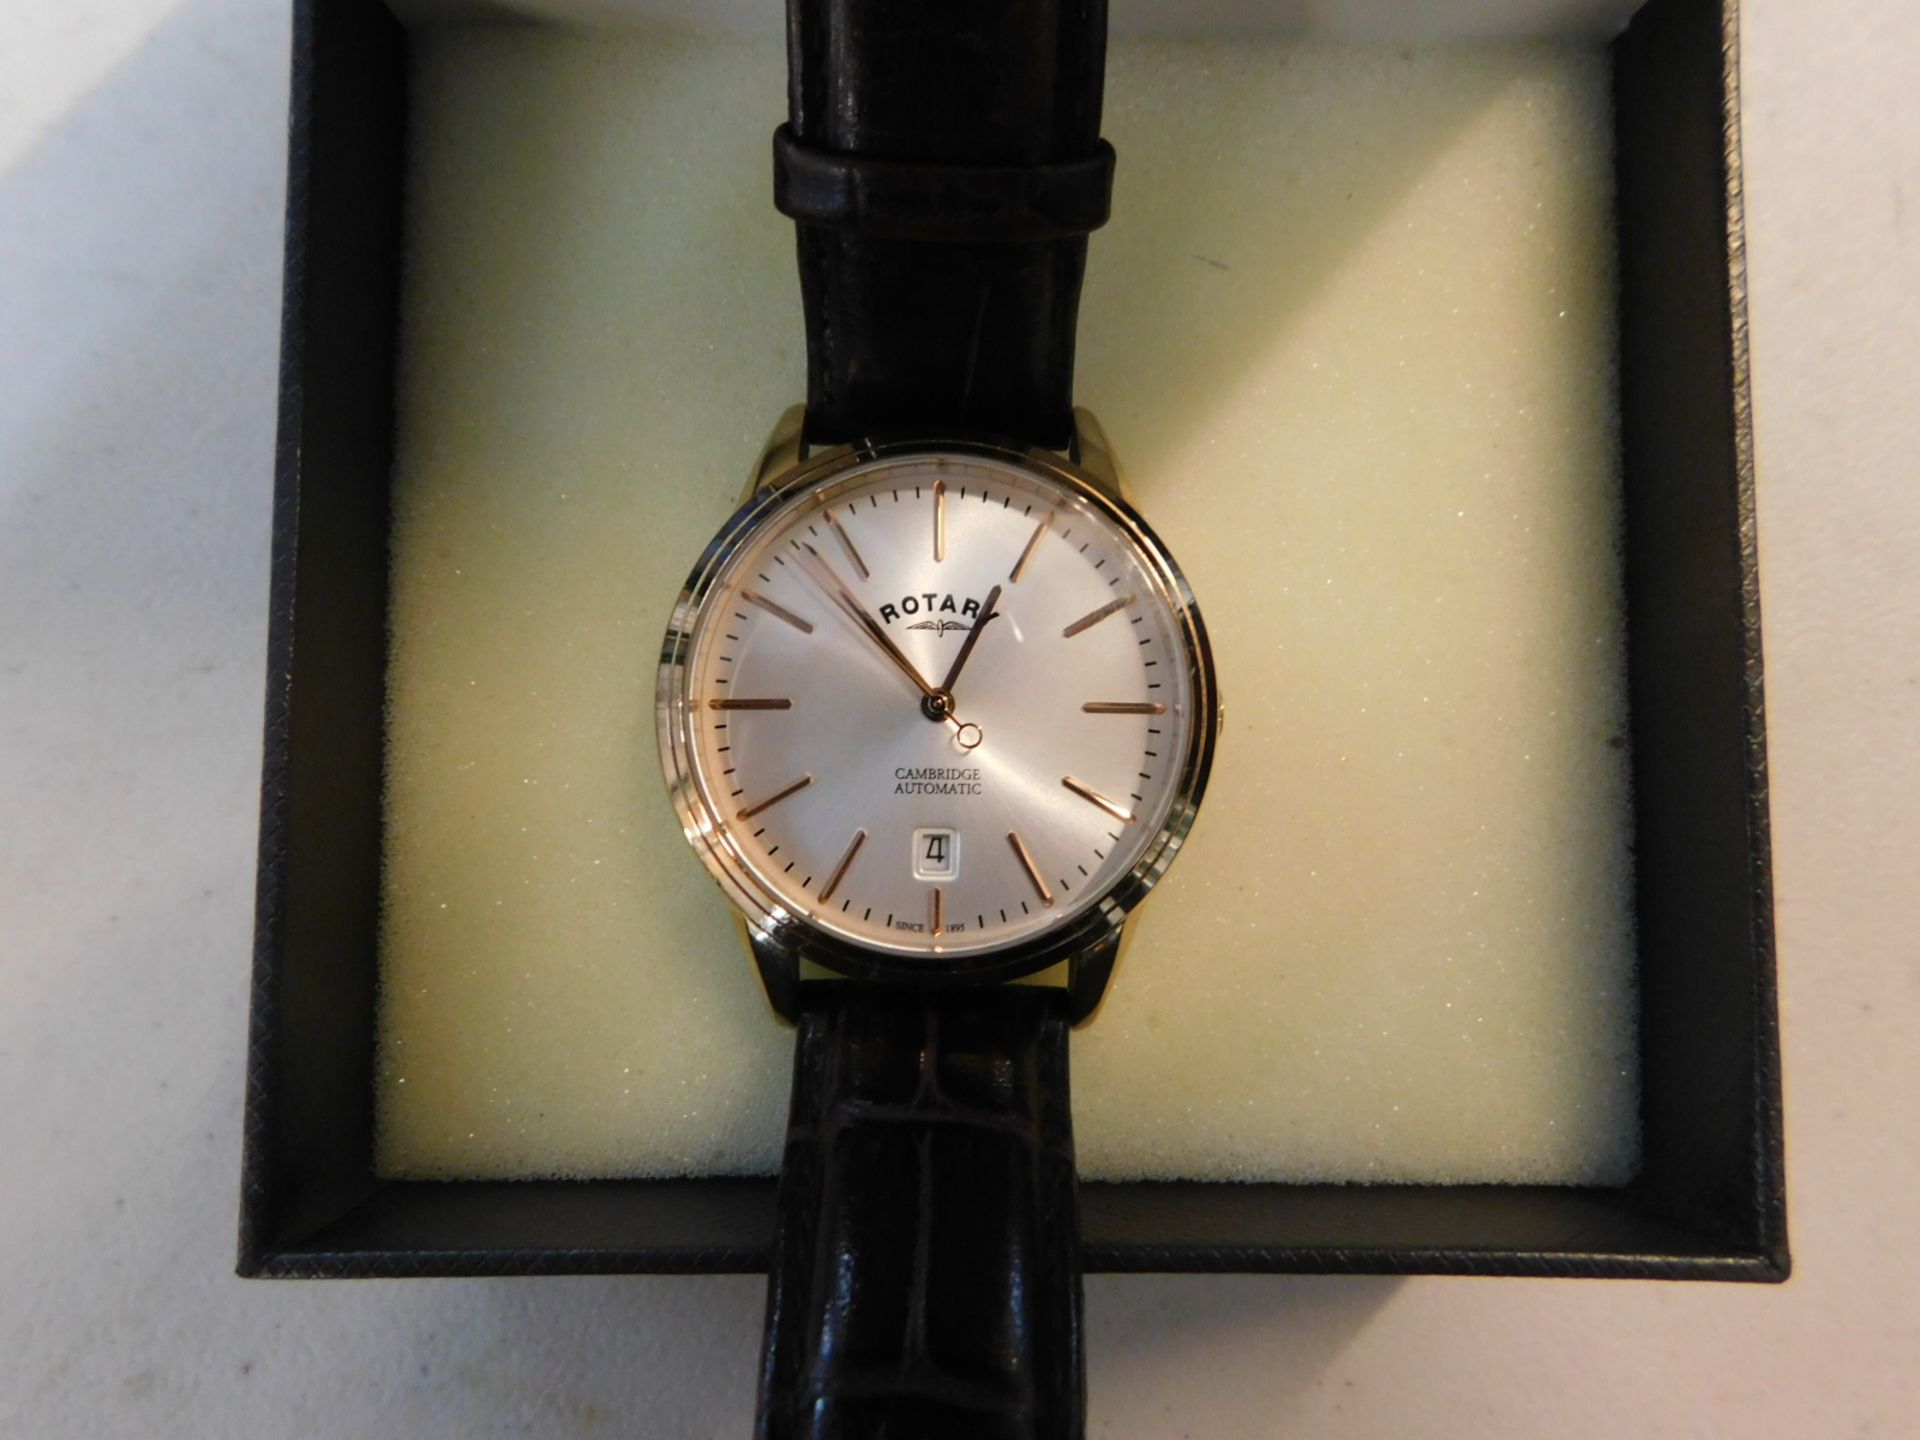 1 BOXED ROTARY CAMBRIDGE AUTOMATIC GENTS WATCH MODEL GS05252/02 RRP Â£299